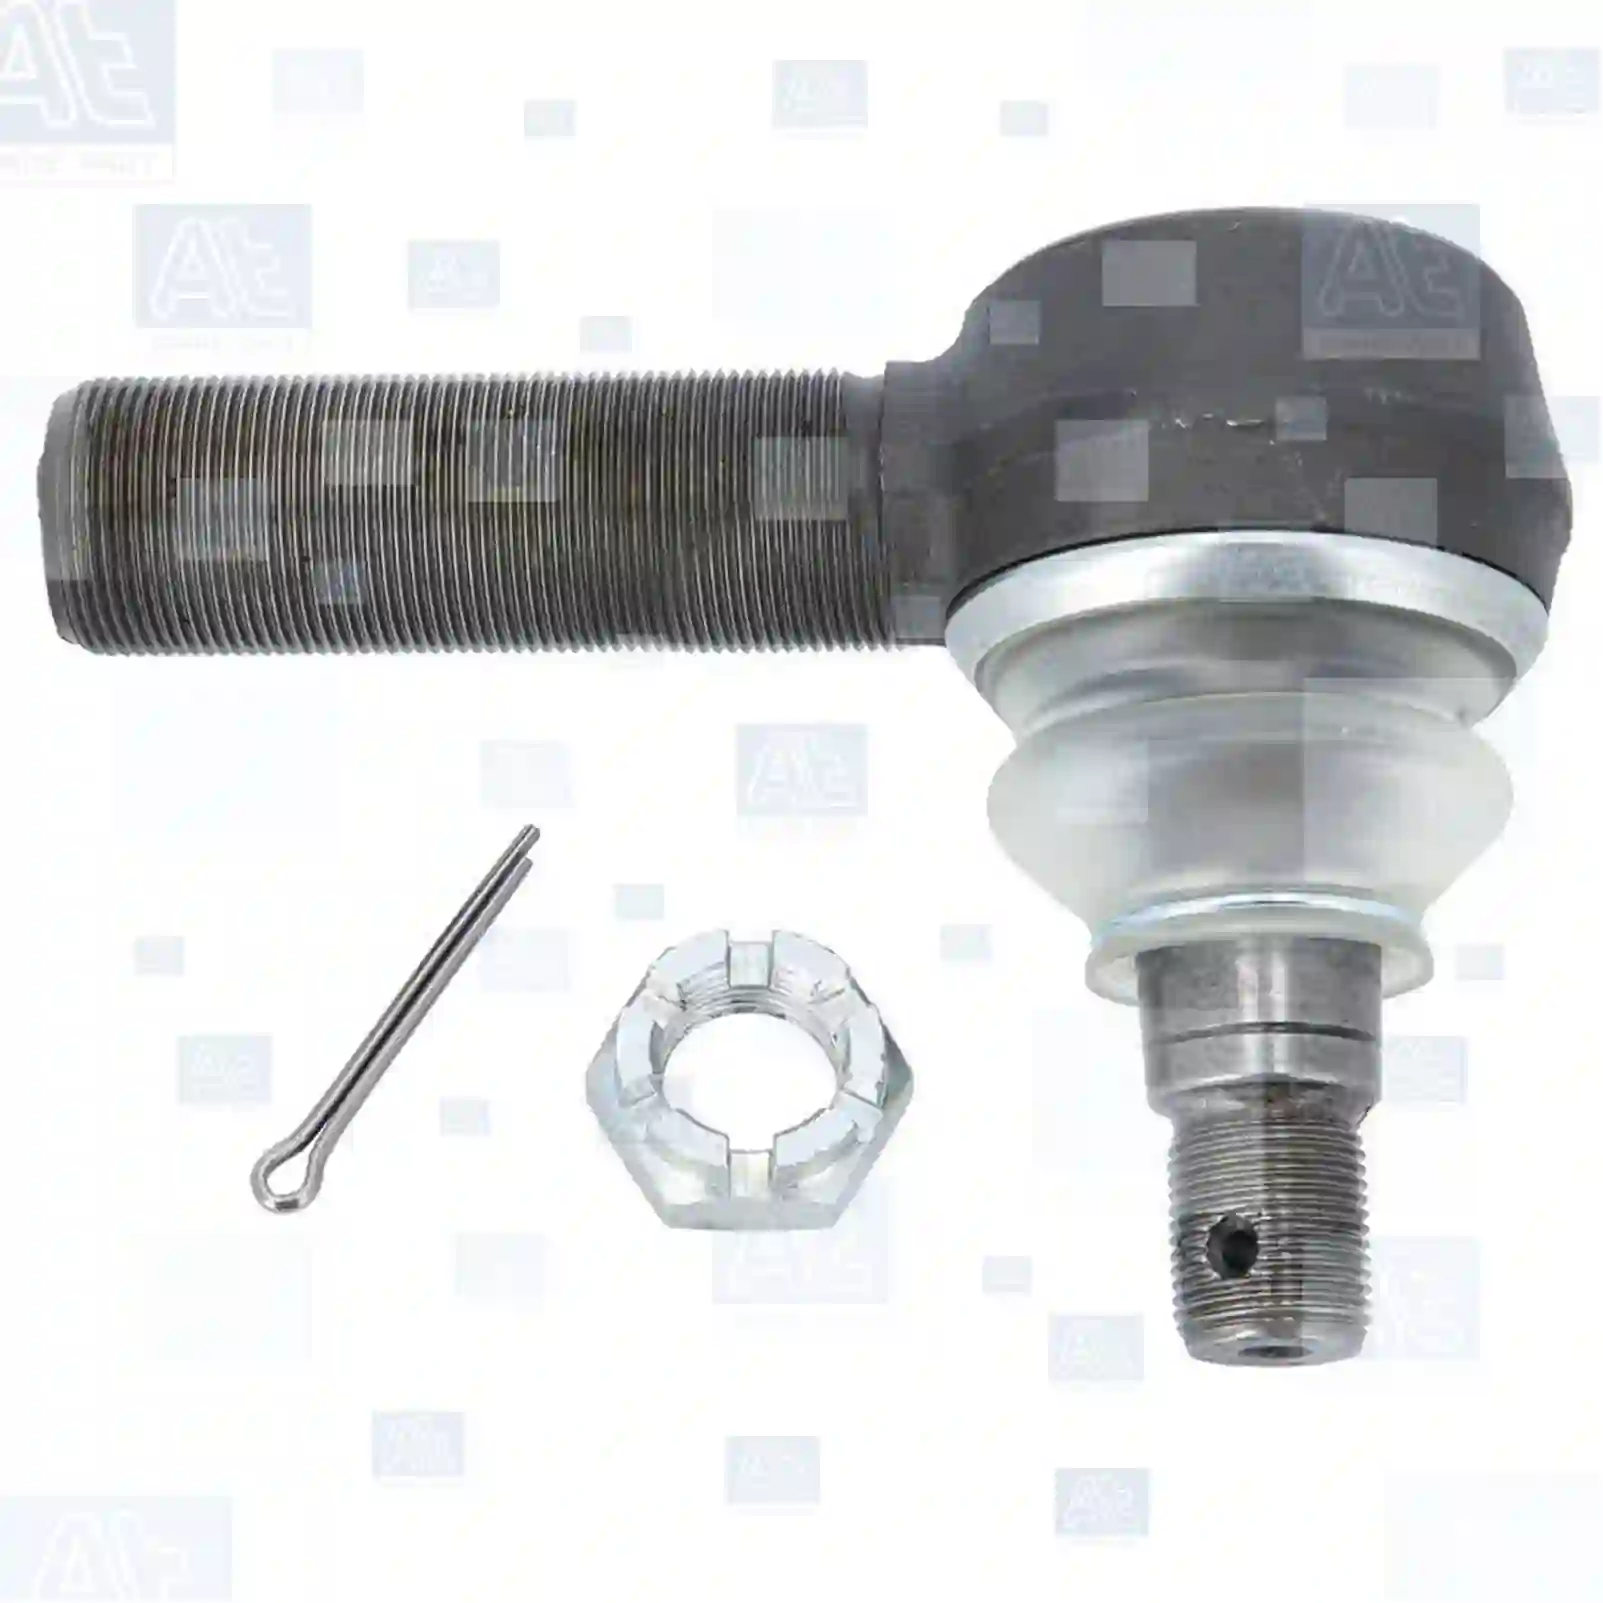 Ball joint, right hand thread, at no 77705368, oem no: 0069867, 0161376, 0608000, 1142173, 1326866, 161376, 608000, 69867, 02980875, 8408396, 99707030174, OG92293, 02980875, 2980875, 81953010025, 81953016151, 90804154117, 0004600148, 0004601848, 0004602648, 0004602748, 84053458, 5000295226, 5000808458, 7701002911, 6851447000, 6851478000, 6851486000, 6851488000, 6851523000, 6851533000, 6861486000, ZG40388-0008 At Spare Part | Engine, Accelerator Pedal, Camshaft, Connecting Rod, Crankcase, Crankshaft, Cylinder Head, Engine Suspension Mountings, Exhaust Manifold, Exhaust Gas Recirculation, Filter Kits, Flywheel Housing, General Overhaul Kits, Engine, Intake Manifold, Oil Cleaner, Oil Cooler, Oil Filter, Oil Pump, Oil Sump, Piston & Liner, Sensor & Switch, Timing Case, Turbocharger, Cooling System, Belt Tensioner, Coolant Filter, Coolant Pipe, Corrosion Prevention Agent, Drive, Expansion Tank, Fan, Intercooler, Monitors & Gauges, Radiator, Thermostat, V-Belt / Timing belt, Water Pump, Fuel System, Electronical Injector Unit, Feed Pump, Fuel Filter, cpl., Fuel Gauge Sender,  Fuel Line, Fuel Pump, Fuel Tank, Injection Line Kit, Injection Pump, Exhaust System, Clutch & Pedal, Gearbox, Propeller Shaft, Axles, Brake System, Hubs & Wheels, Suspension, Leaf Spring, Universal Parts / Accessories, Steering, Electrical System, Cabin Ball joint, right hand thread, at no 77705368, oem no: 0069867, 0161376, 0608000, 1142173, 1326866, 161376, 608000, 69867, 02980875, 8408396, 99707030174, OG92293, 02980875, 2980875, 81953010025, 81953016151, 90804154117, 0004600148, 0004601848, 0004602648, 0004602748, 84053458, 5000295226, 5000808458, 7701002911, 6851447000, 6851478000, 6851486000, 6851488000, 6851523000, 6851533000, 6861486000, ZG40388-0008 At Spare Part | Engine, Accelerator Pedal, Camshaft, Connecting Rod, Crankcase, Crankshaft, Cylinder Head, Engine Suspension Mountings, Exhaust Manifold, Exhaust Gas Recirculation, Filter Kits, Flywheel Housing, General Overhaul Kits, Engine, Intake Manifold, Oil Cleaner, Oil Cooler, Oil Filter, Oil Pump, Oil Sump, Piston & Liner, Sensor & Switch, Timing Case, Turbocharger, Cooling System, Belt Tensioner, Coolant Filter, Coolant Pipe, Corrosion Prevention Agent, Drive, Expansion Tank, Fan, Intercooler, Monitors & Gauges, Radiator, Thermostat, V-Belt / Timing belt, Water Pump, Fuel System, Electronical Injector Unit, Feed Pump, Fuel Filter, cpl., Fuel Gauge Sender,  Fuel Line, Fuel Pump, Fuel Tank, Injection Line Kit, Injection Pump, Exhaust System, Clutch & Pedal, Gearbox, Propeller Shaft, Axles, Brake System, Hubs & Wheels, Suspension, Leaf Spring, Universal Parts / Accessories, Steering, Electrical System, Cabin